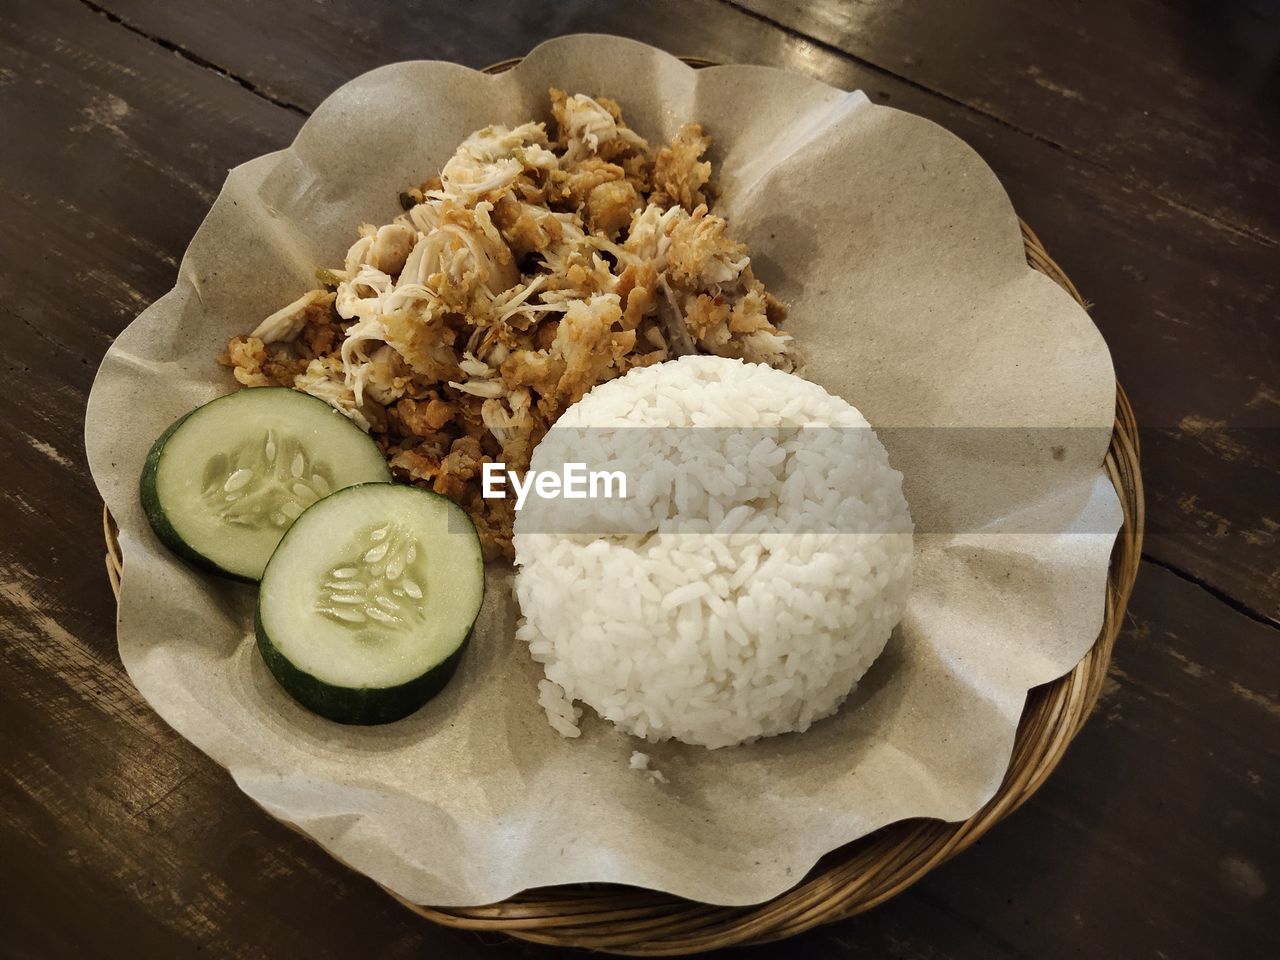 food and drink, food, freshness, healthy eating, wellbeing, dish, indoors, high angle view, table, no people, meal, still life, vegetable, rice, cuisine, produce, wood, rice - food staple, steamed rice, bowl